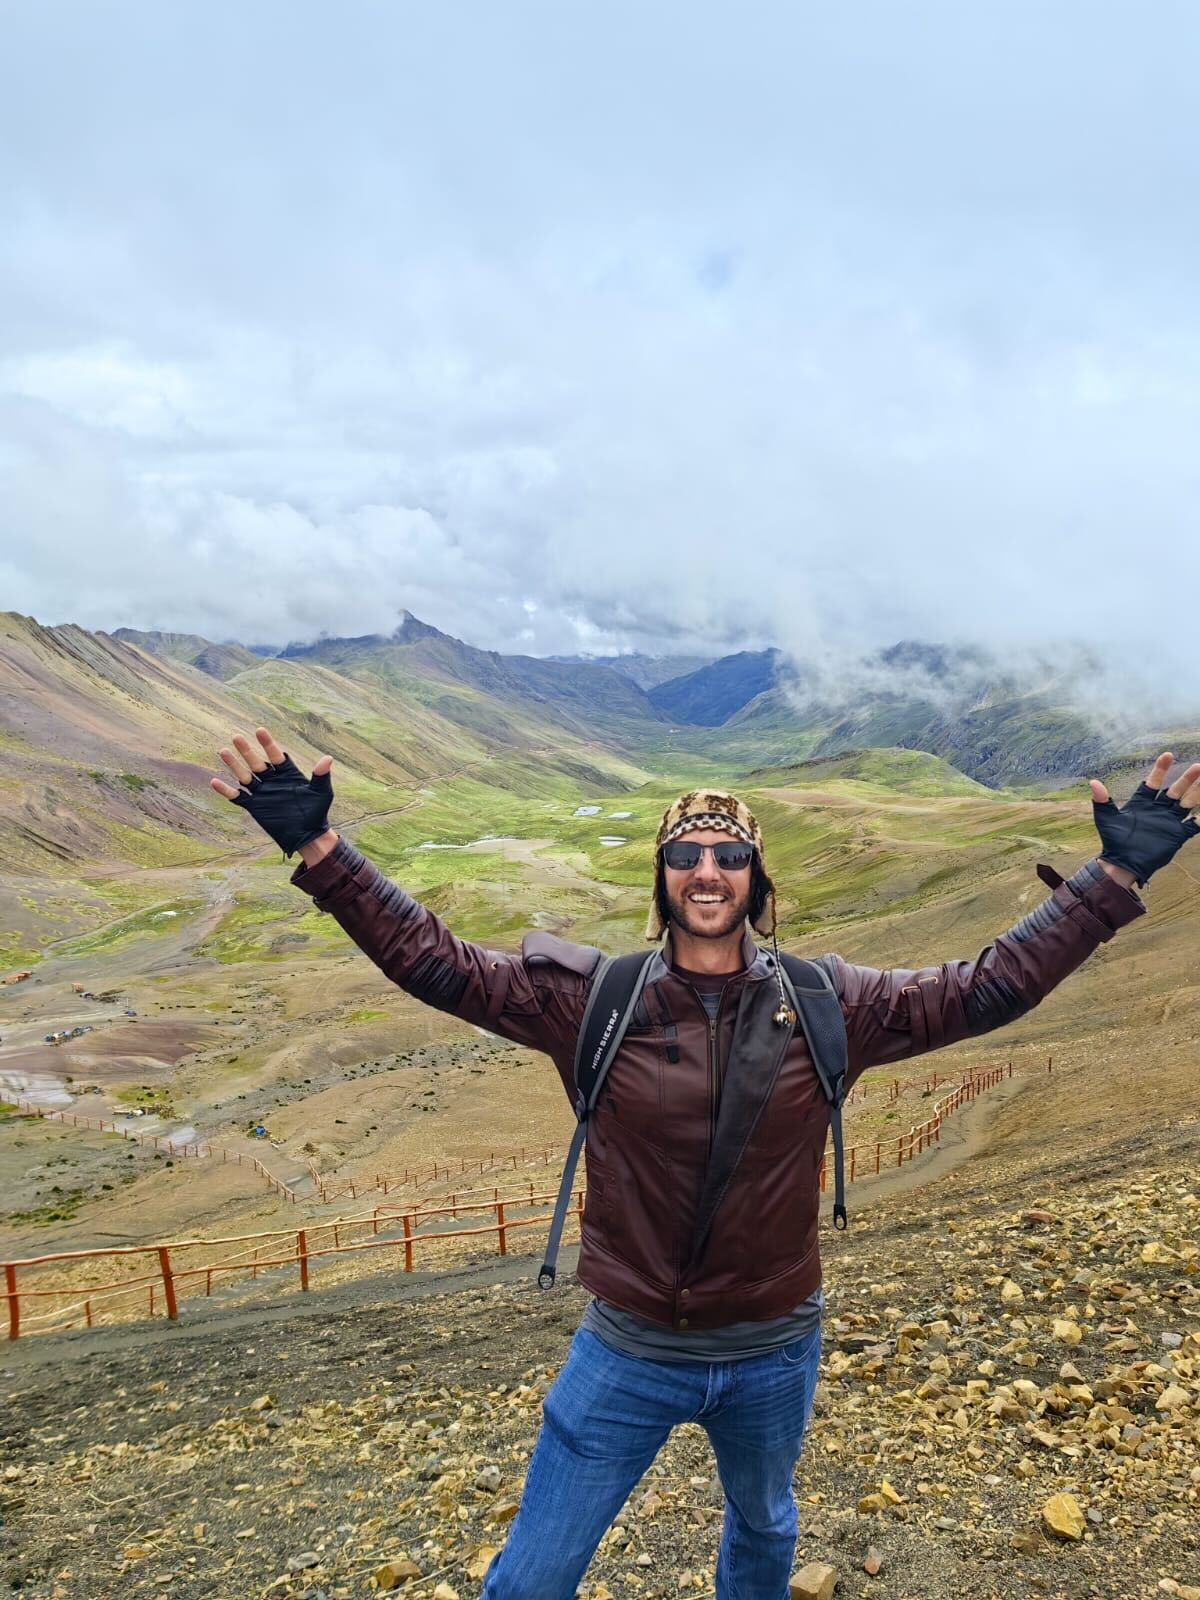 A person in a brown jacket and blue jeans stands on a mountainous trail with arms raised in joy, showcasing the excitement of employee travel. They wear gloves, a headband, sunglasses, and a backpack. The backdrop features rolling hills, scattered rocks, a lush green valley, and a cloud-filled sky.